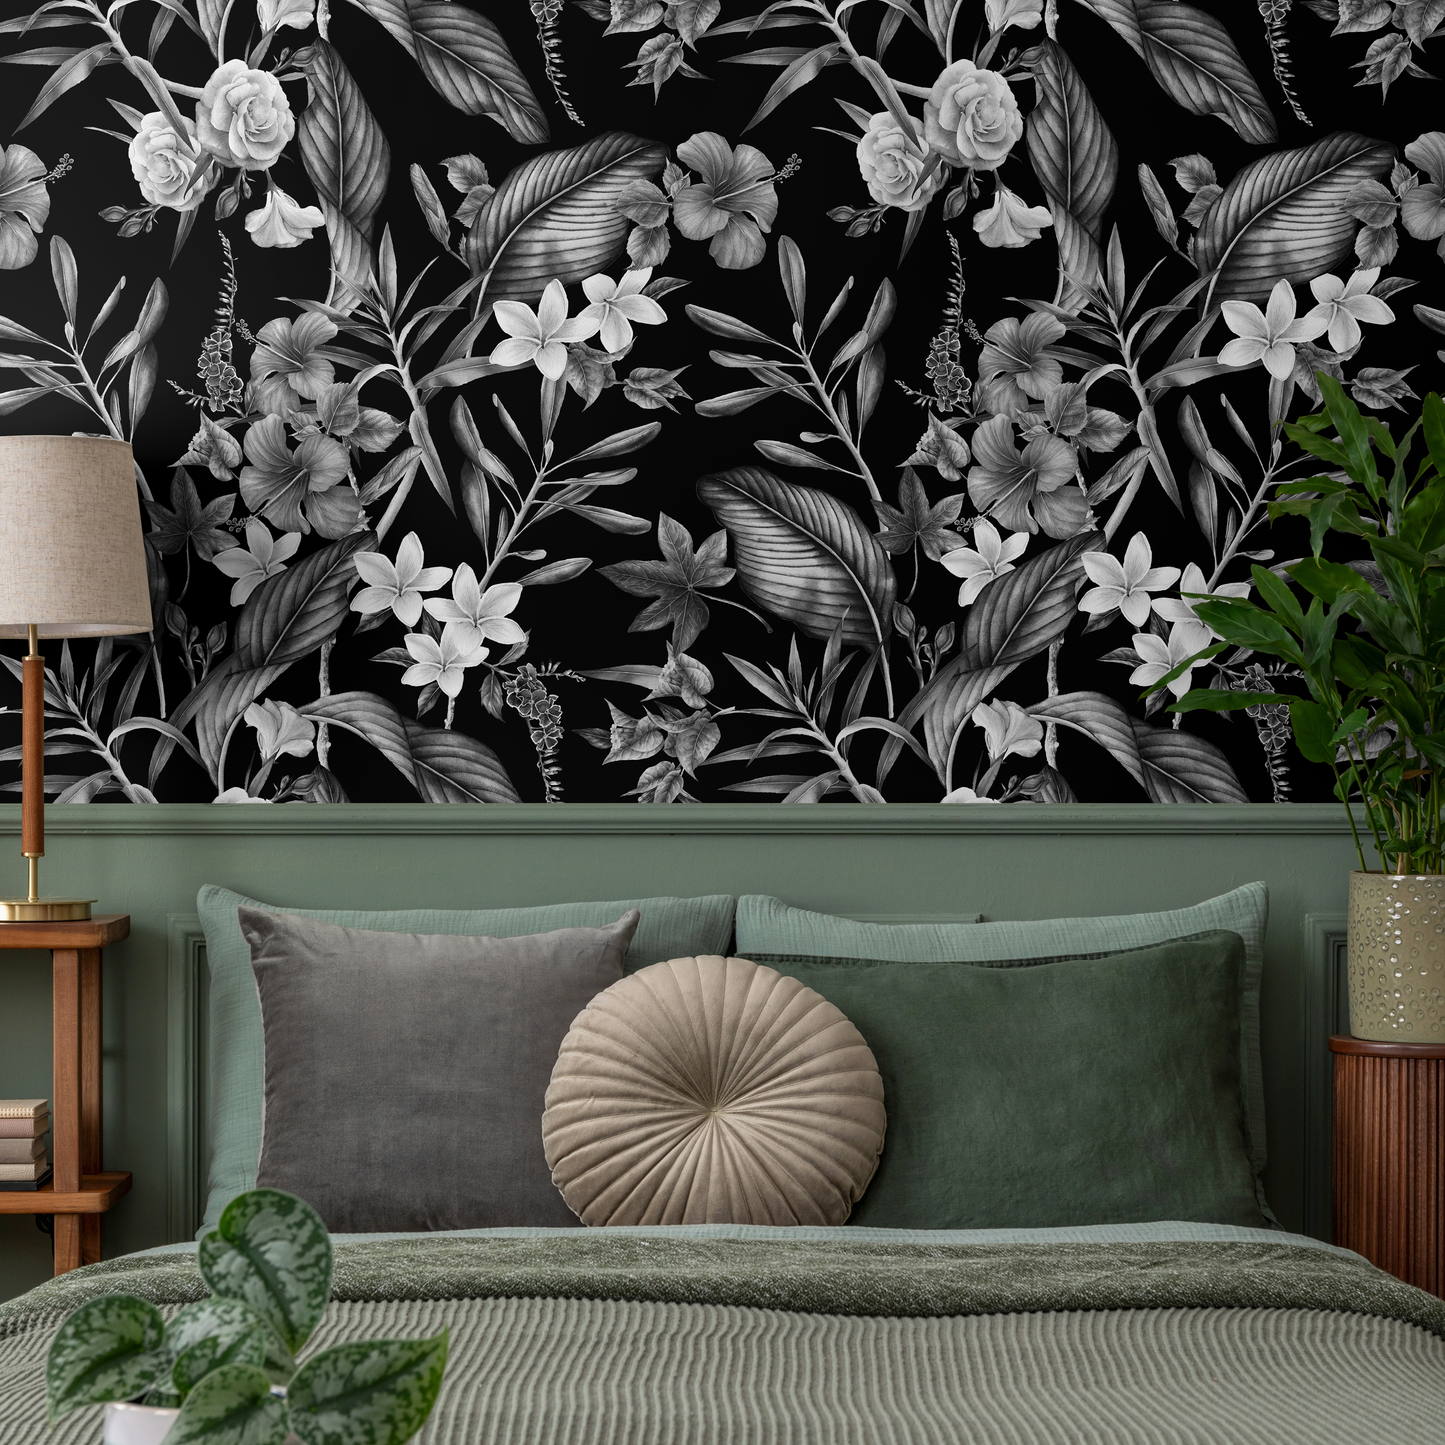 Dark Floral Botanical Wallpaper Vintage Wallpaper Peel and Stick and Traditional Wallpaper - A382